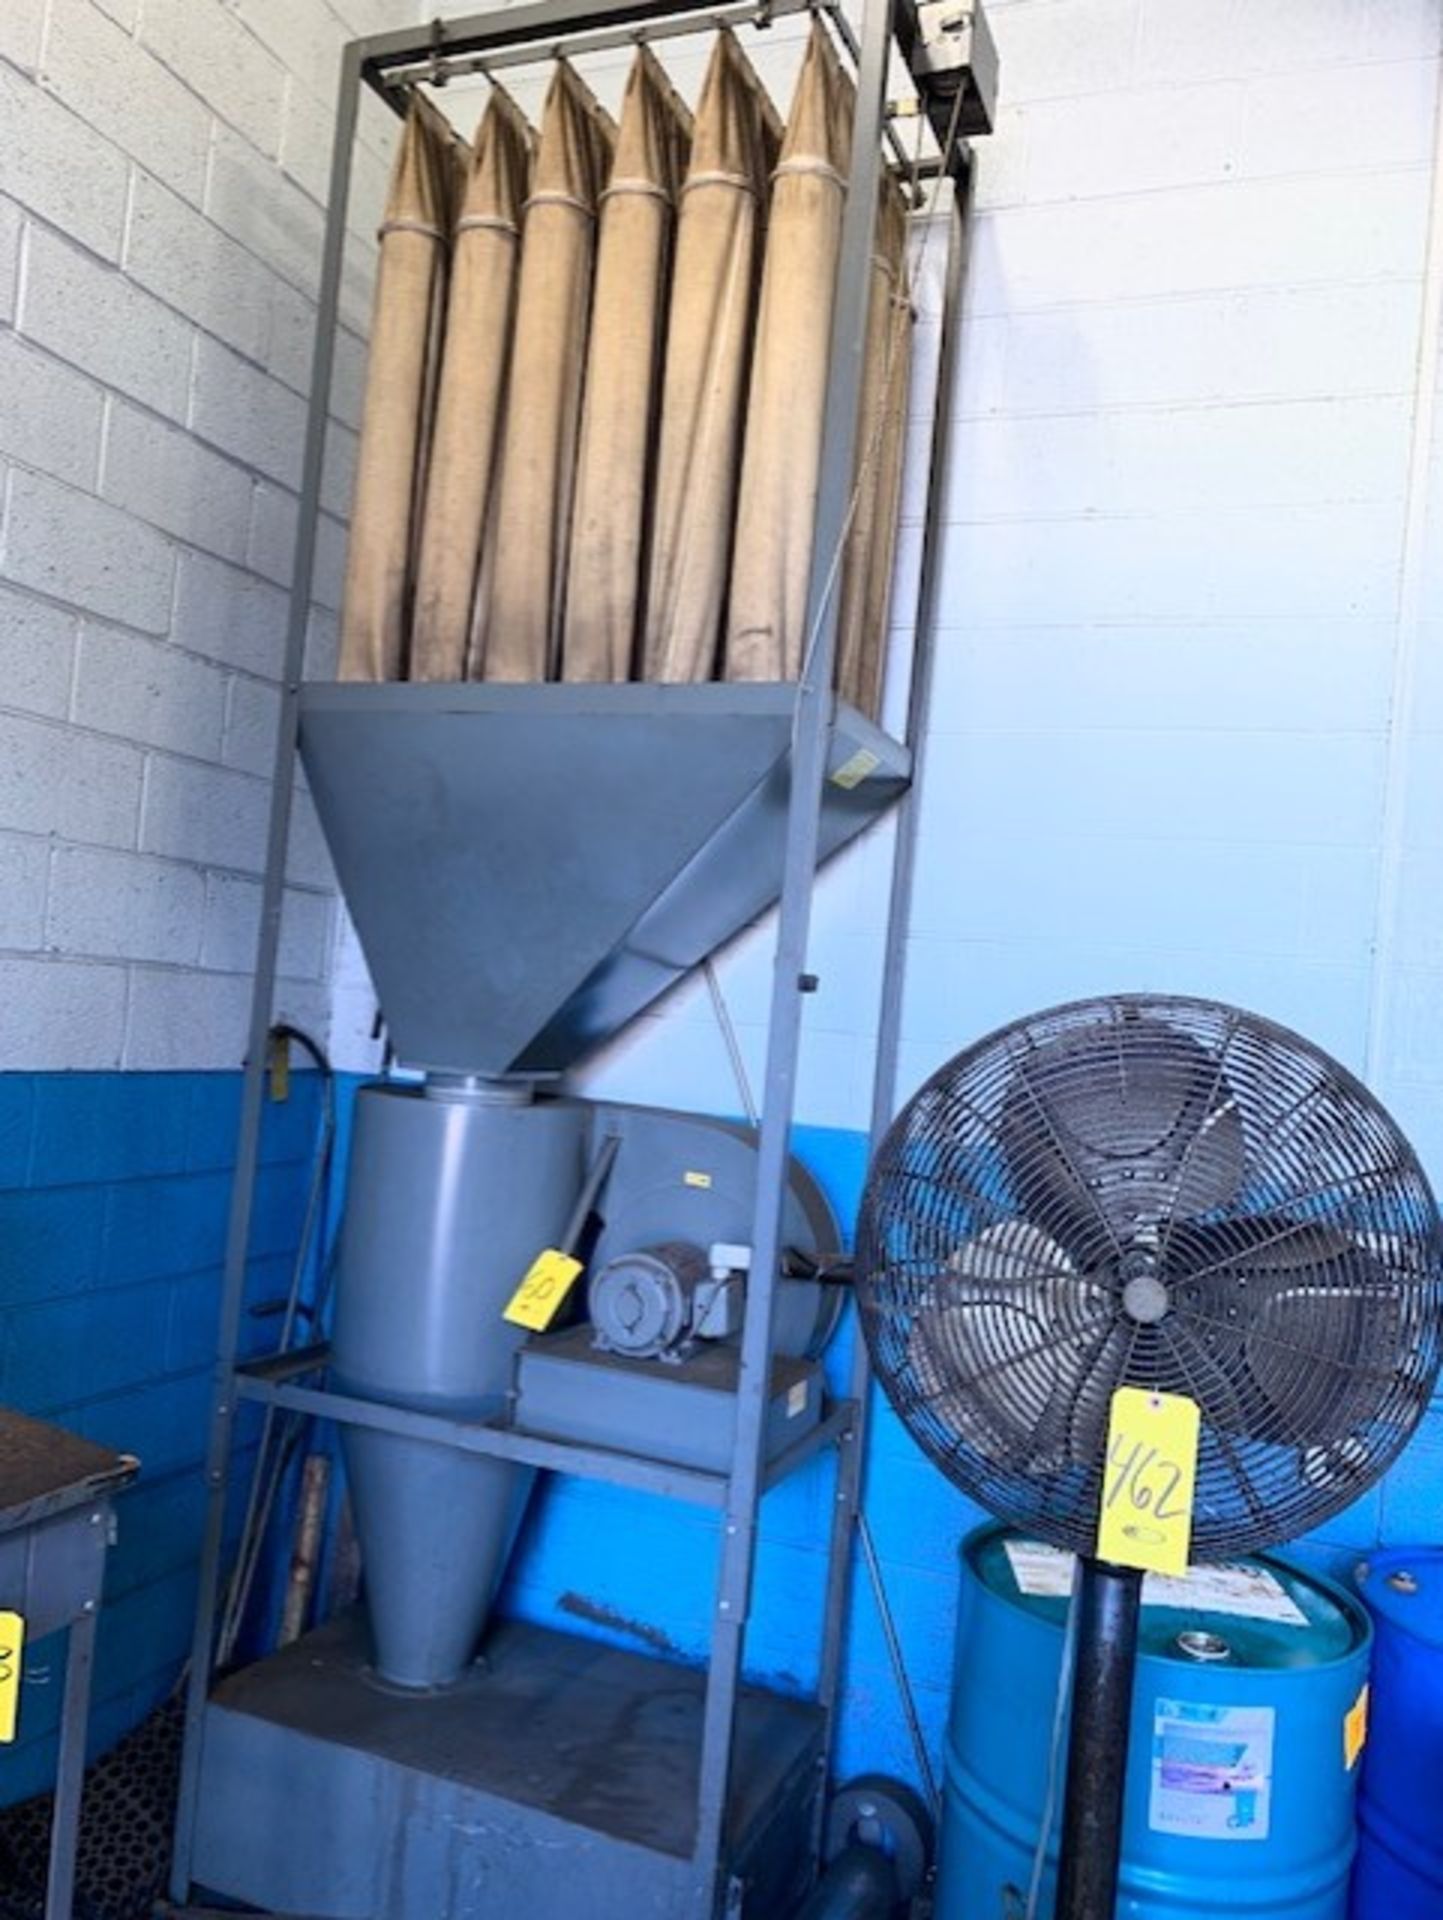 AGET 20T31-SP DUST COLLECTOR WITH 24 FILTER BAGS AND BLOWER - Image 2 of 2